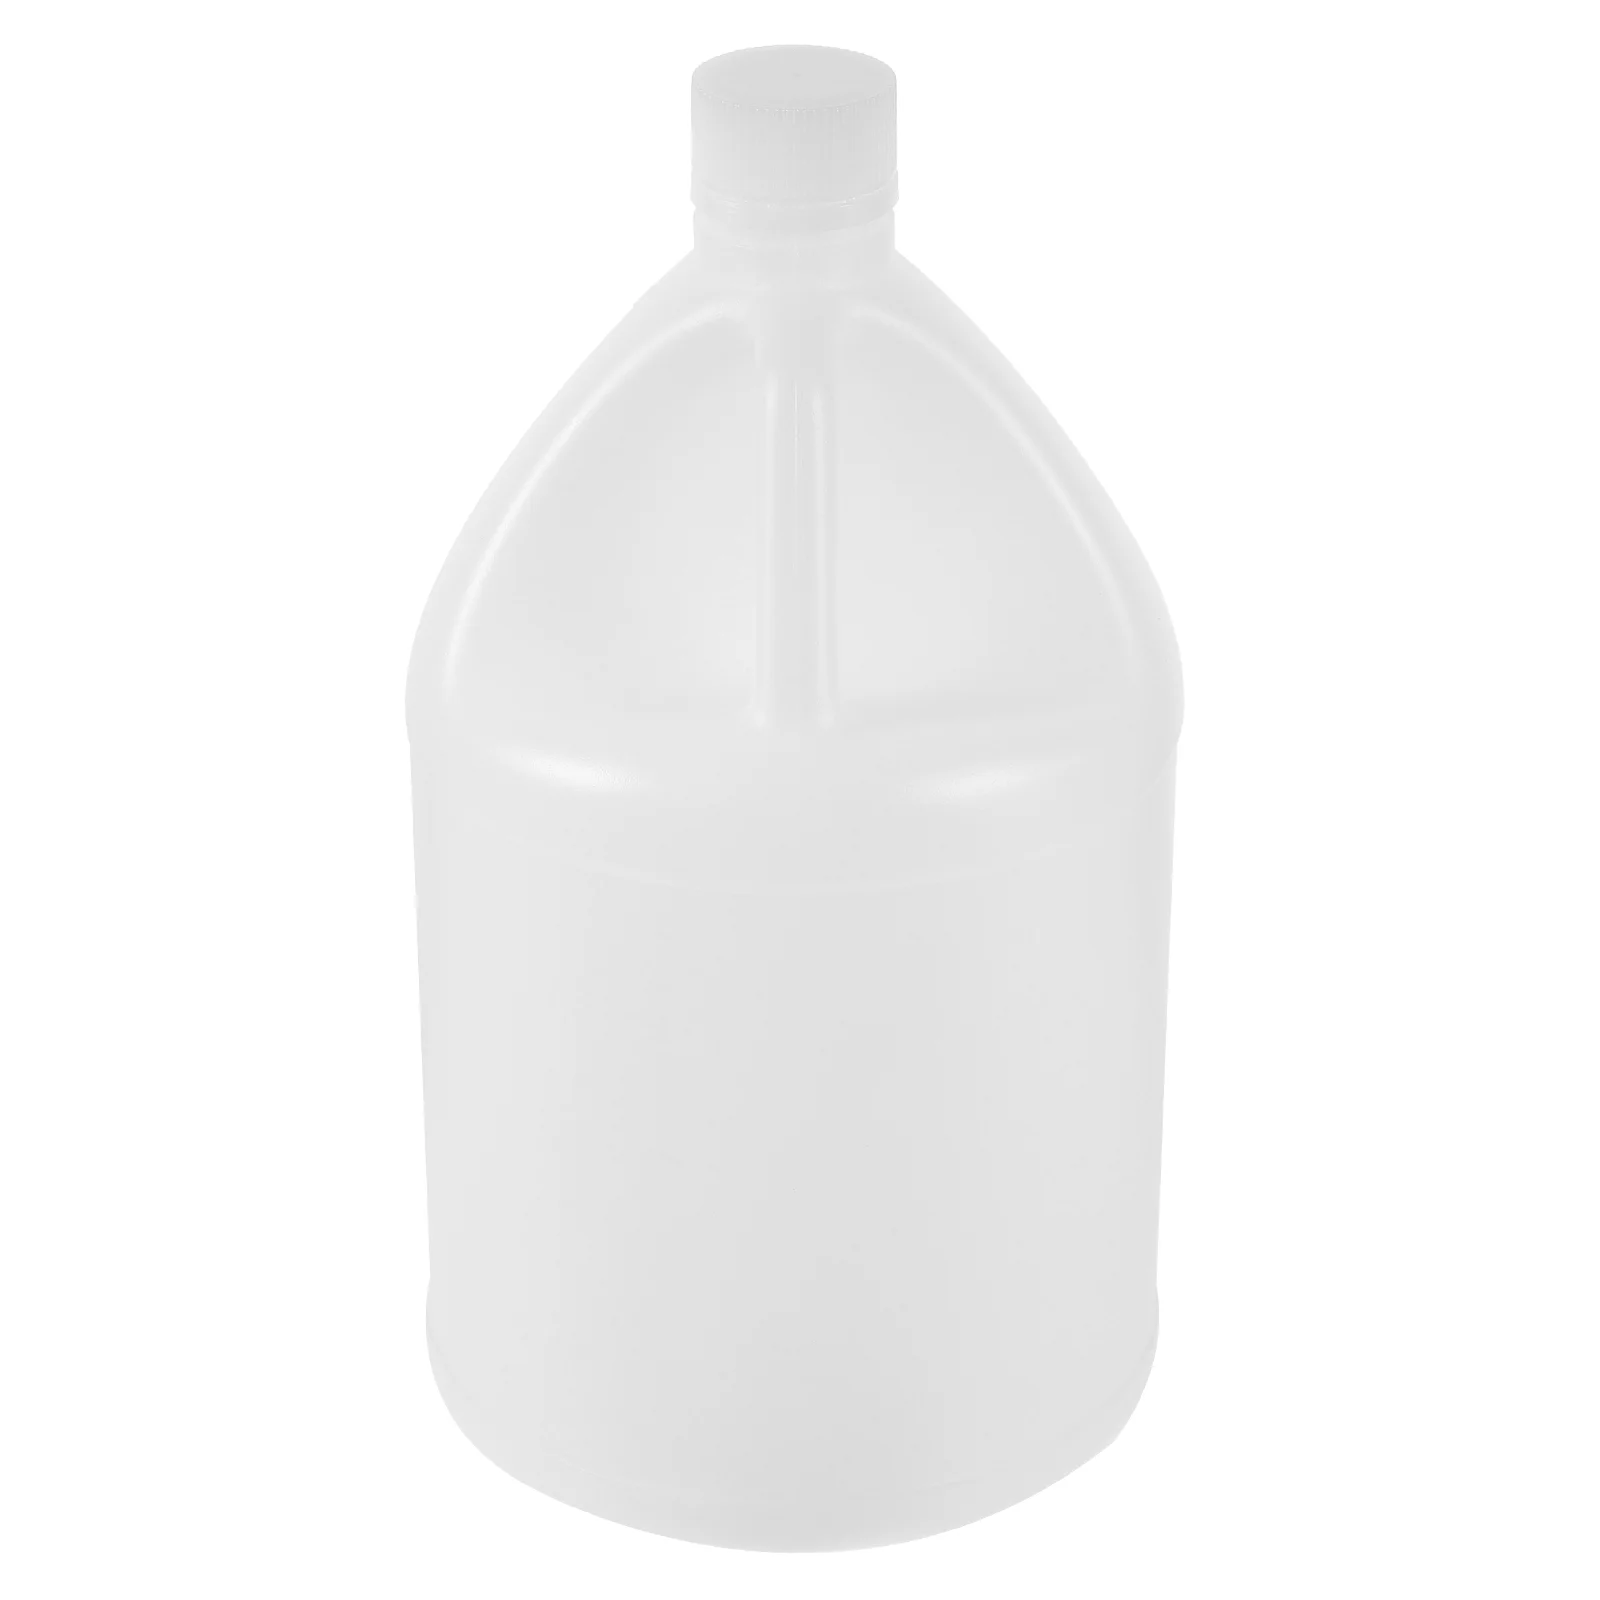 

Plastic Barrel White Bucket Jug With Lid Oil Container Kettle Large Capacity 4 Liter Gallon Bottle Food Containers Lids